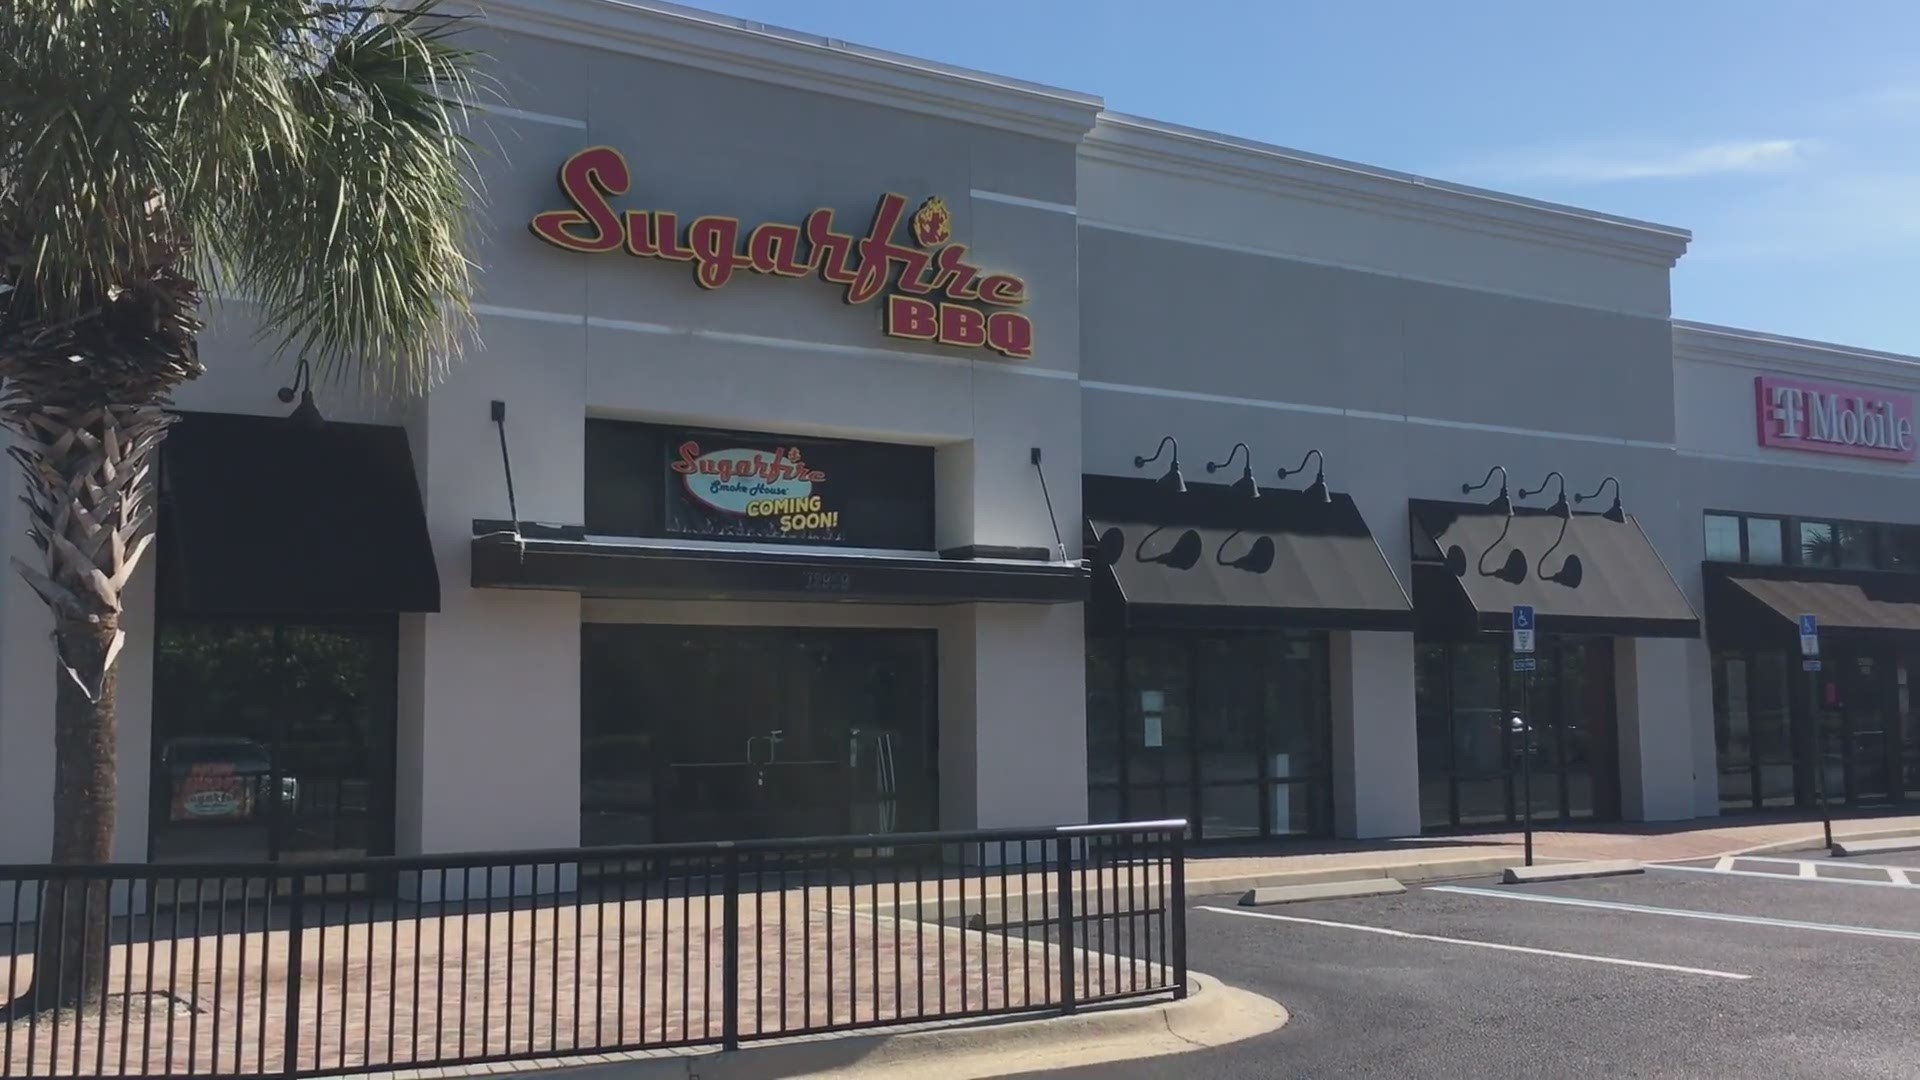 St. Louis-based barbecue chain Sugarfire BBQ is opening in the former Panera Bread location at 12959 Atlantic Blvd., east of Girvin Road.
Credit: Harold Goodridge